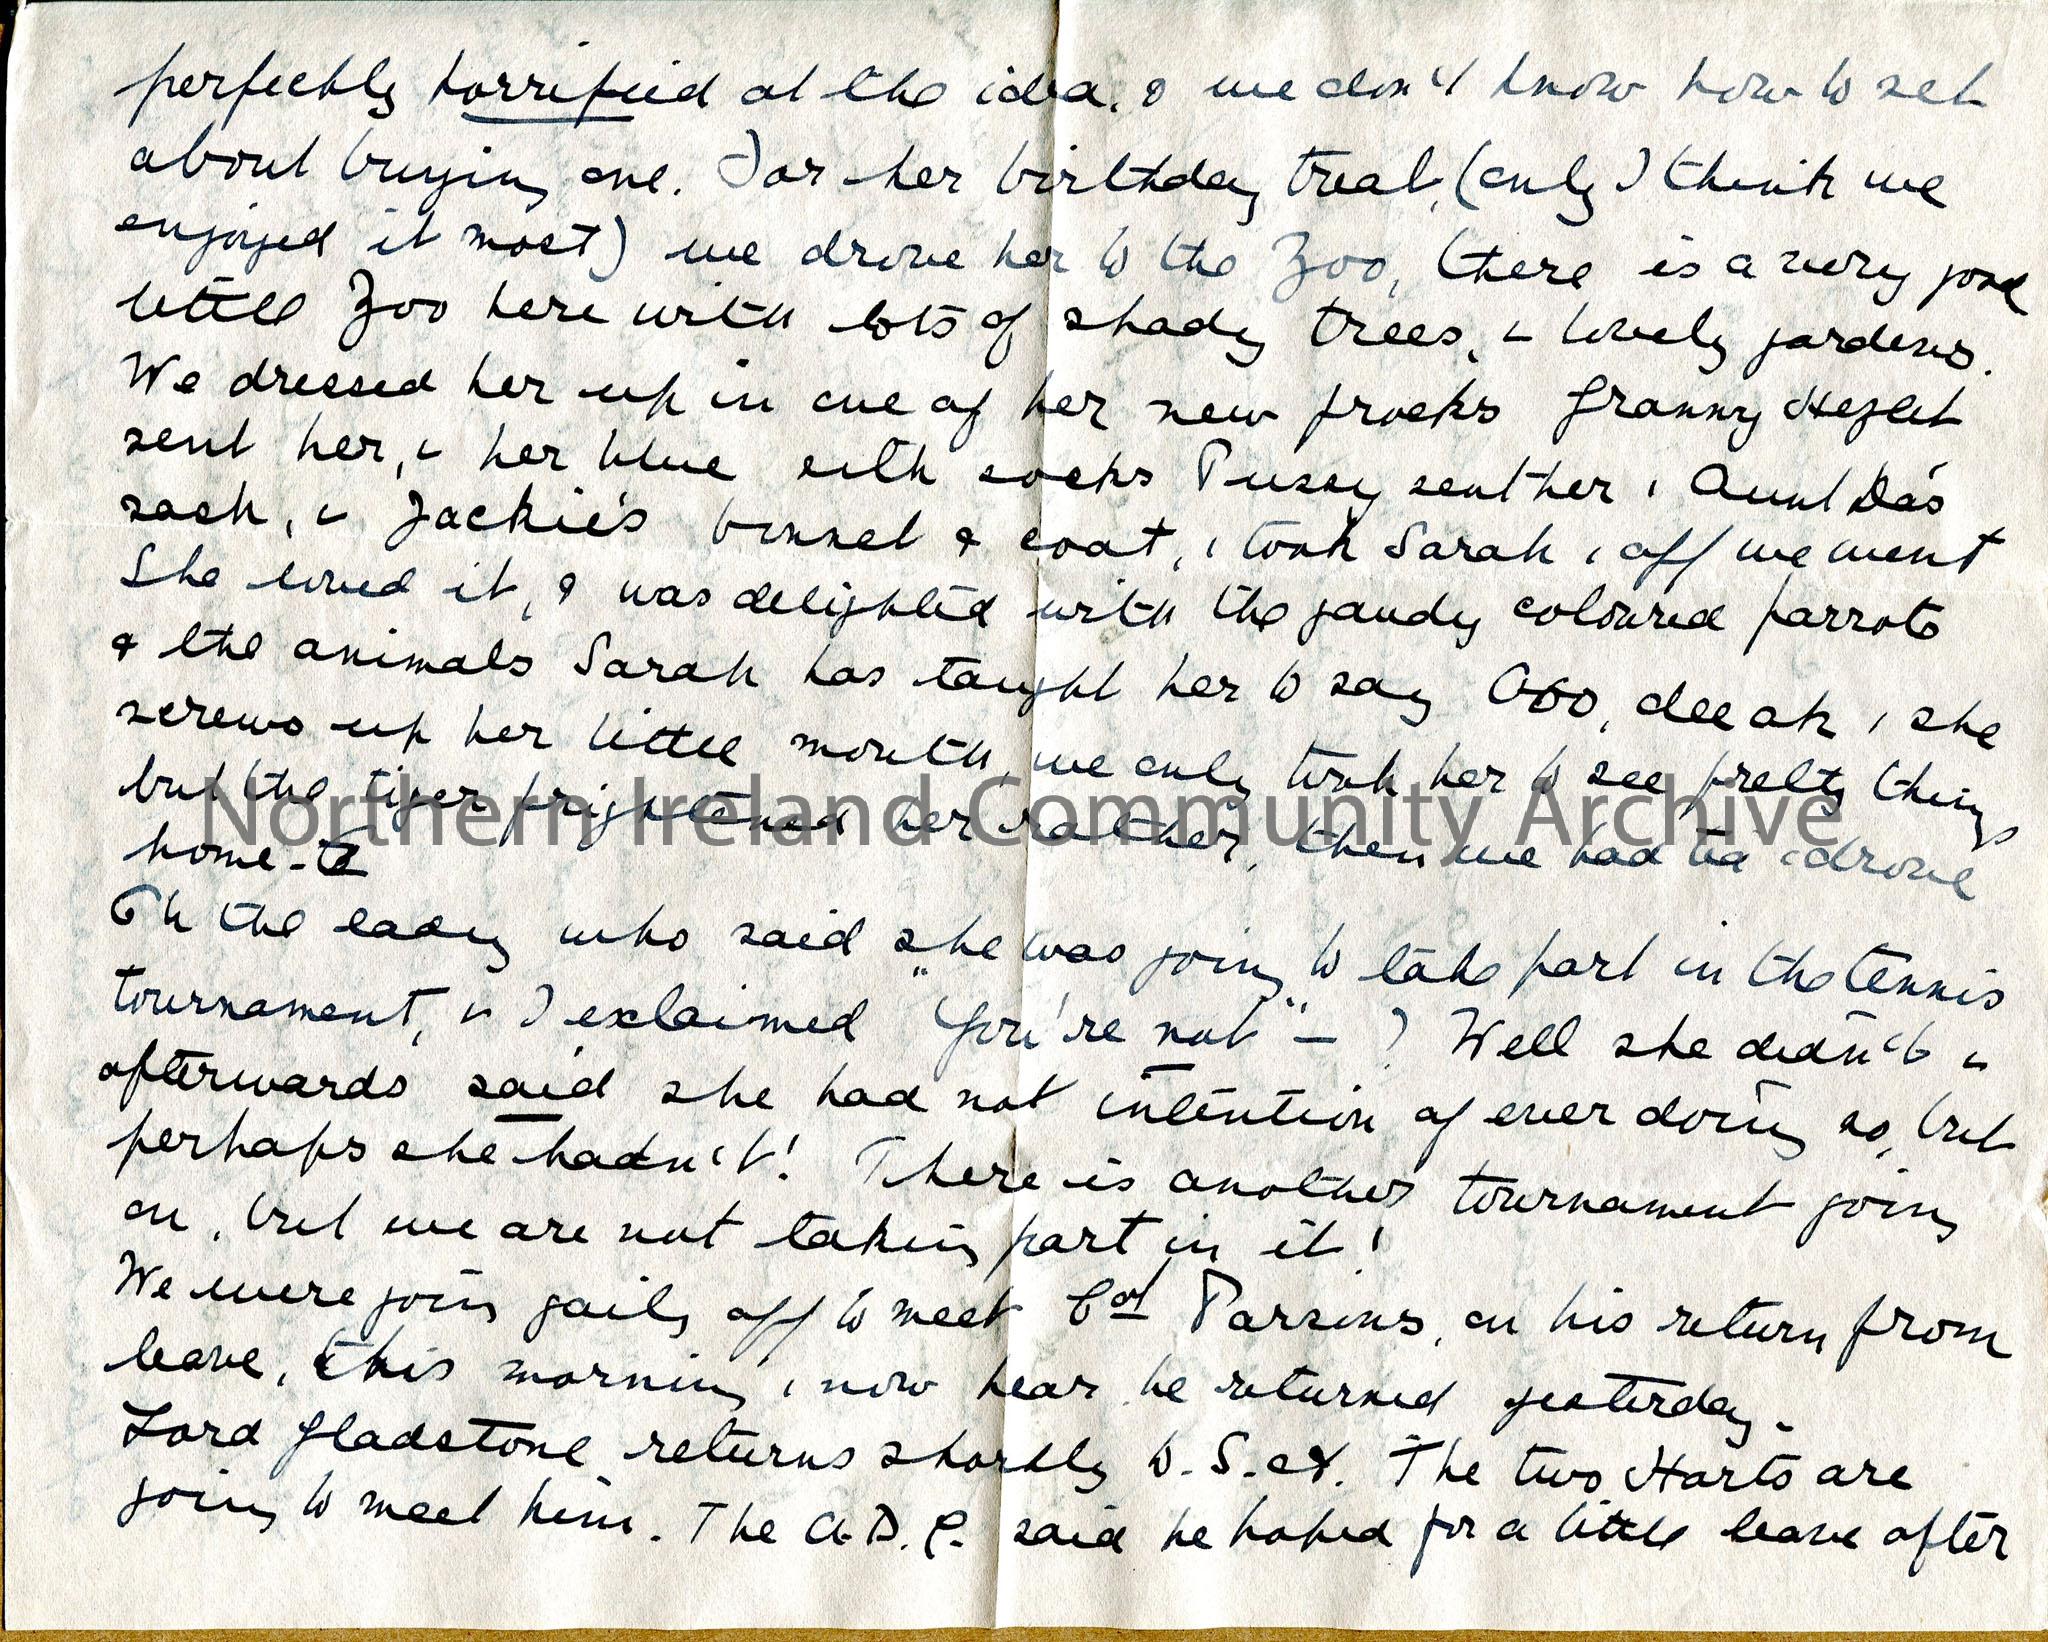 One of 3 pages of handwritten letter. Dressed ‘Baby’ up and took her to zoo for her birthday. Describes a dinner party she held, with details of femal… – img030b